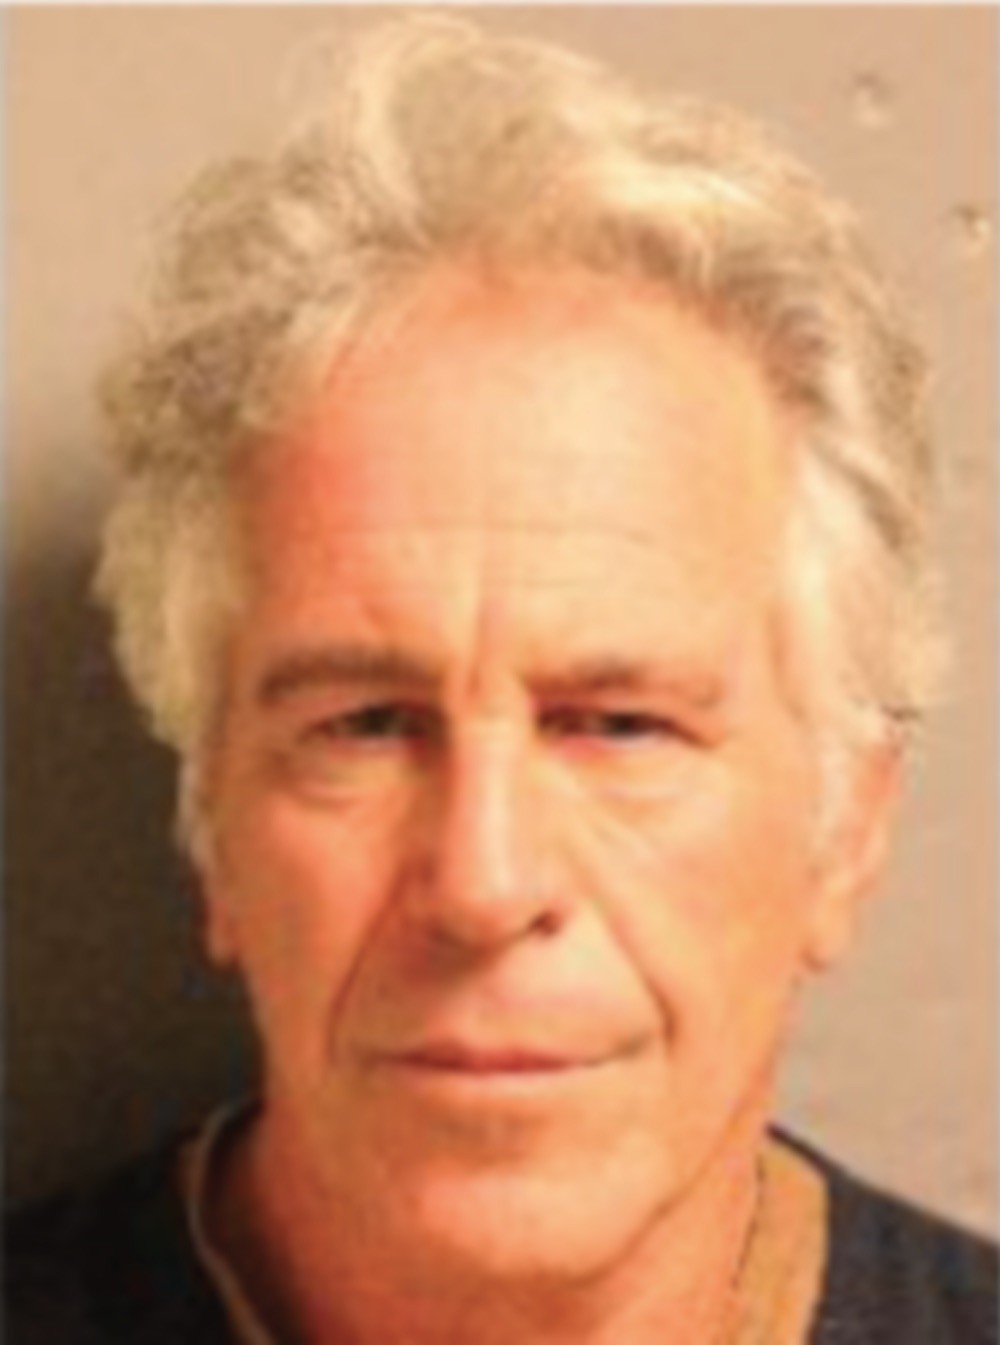 Federal Appeals Court Will Reconsider Jeffrey Epstein Victims Case 9647